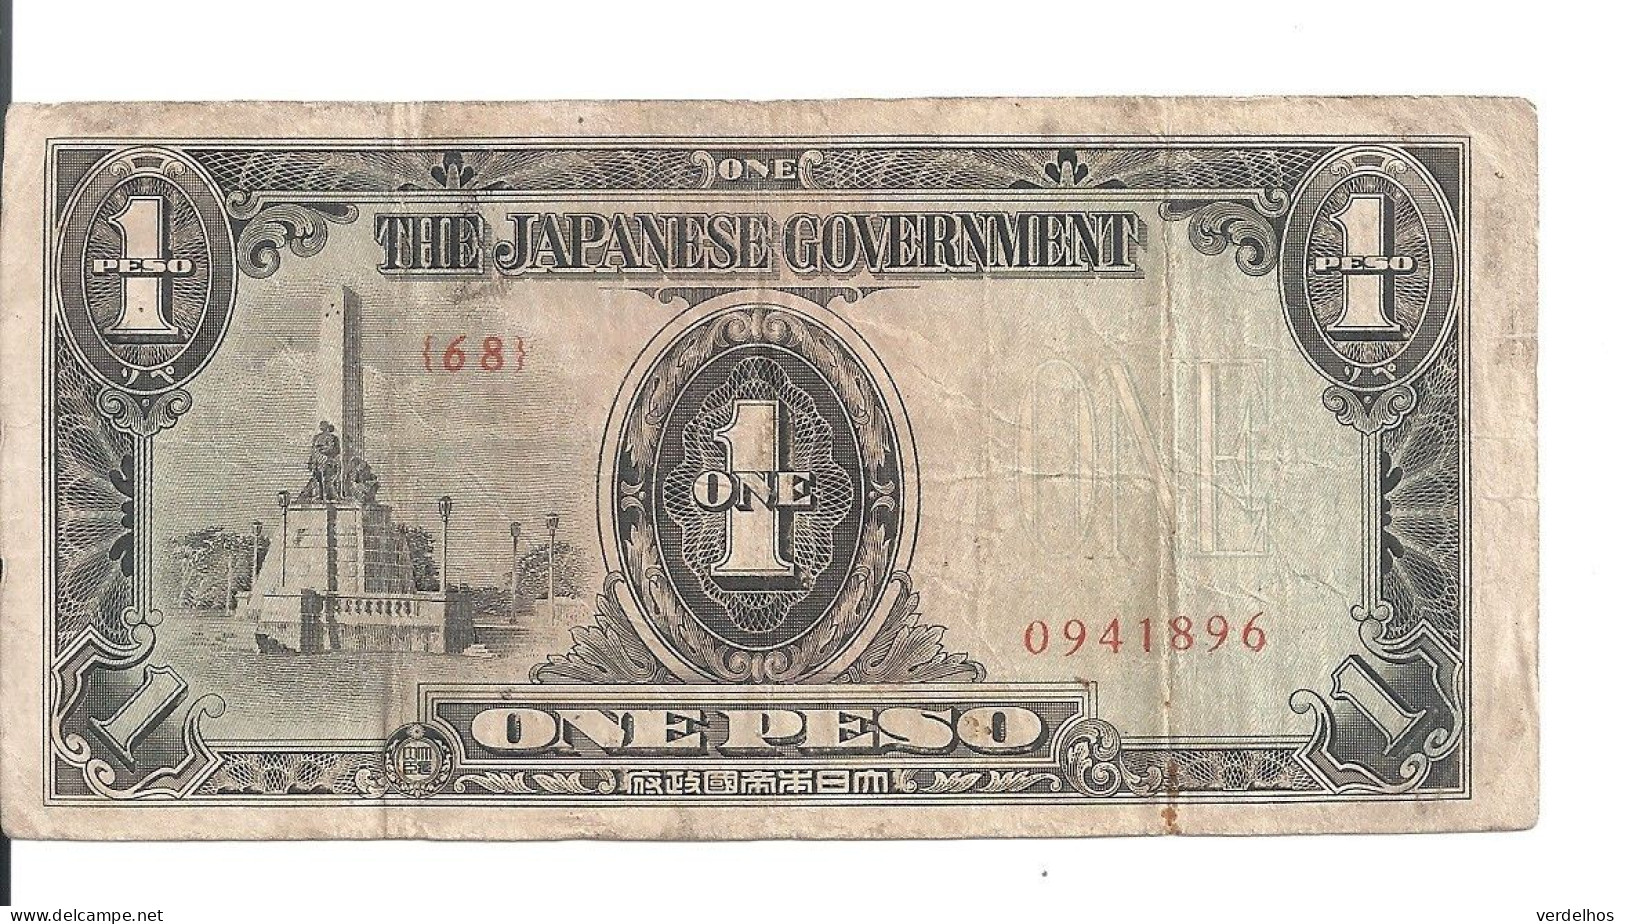 PHILIPPINES ( Japanese Goverment ) 1 PESO ND1943 VF - Philippines